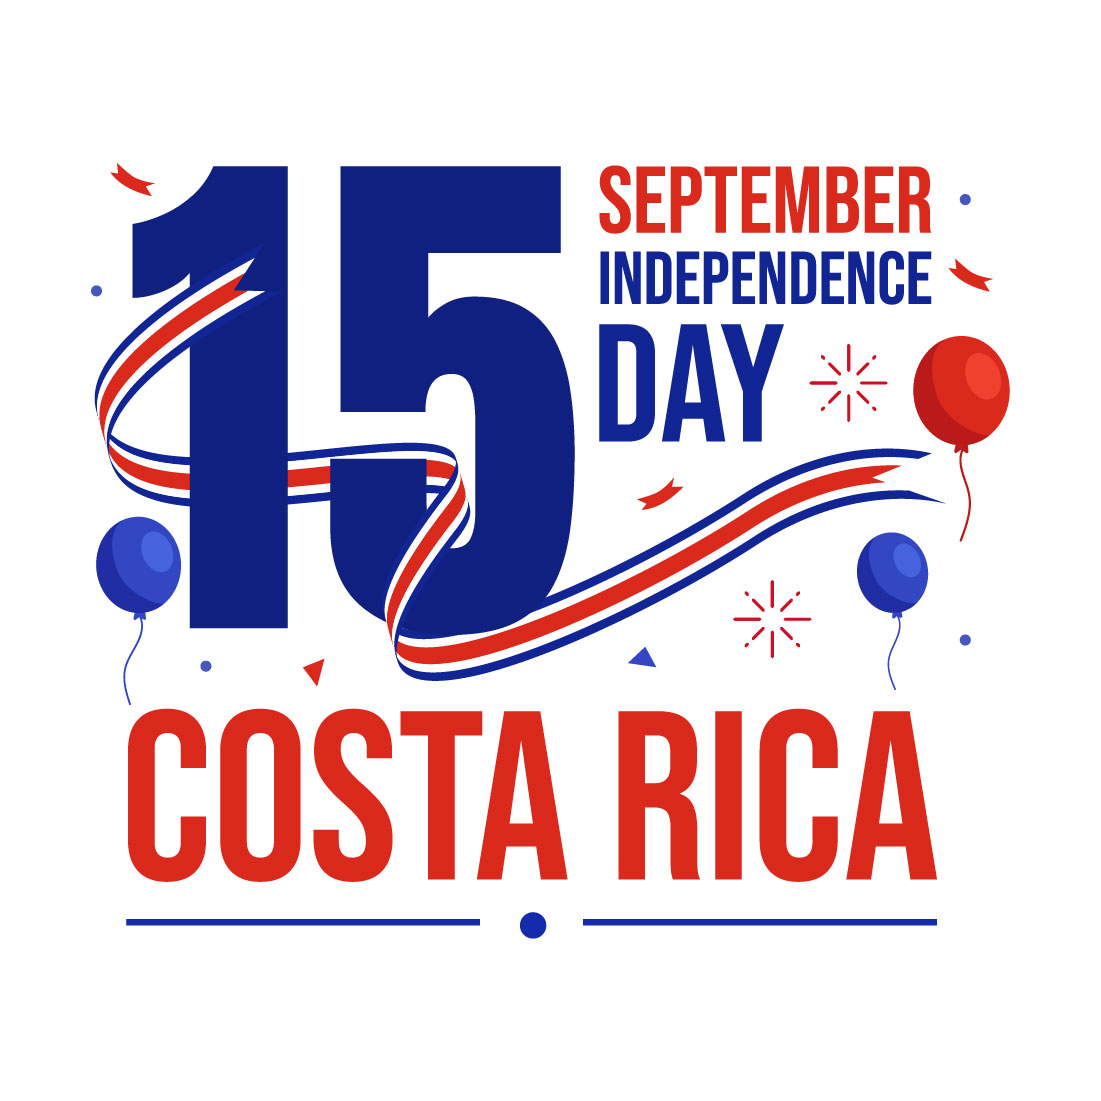 16 Happy Independence Day of Costa Rica Illustration cover image.